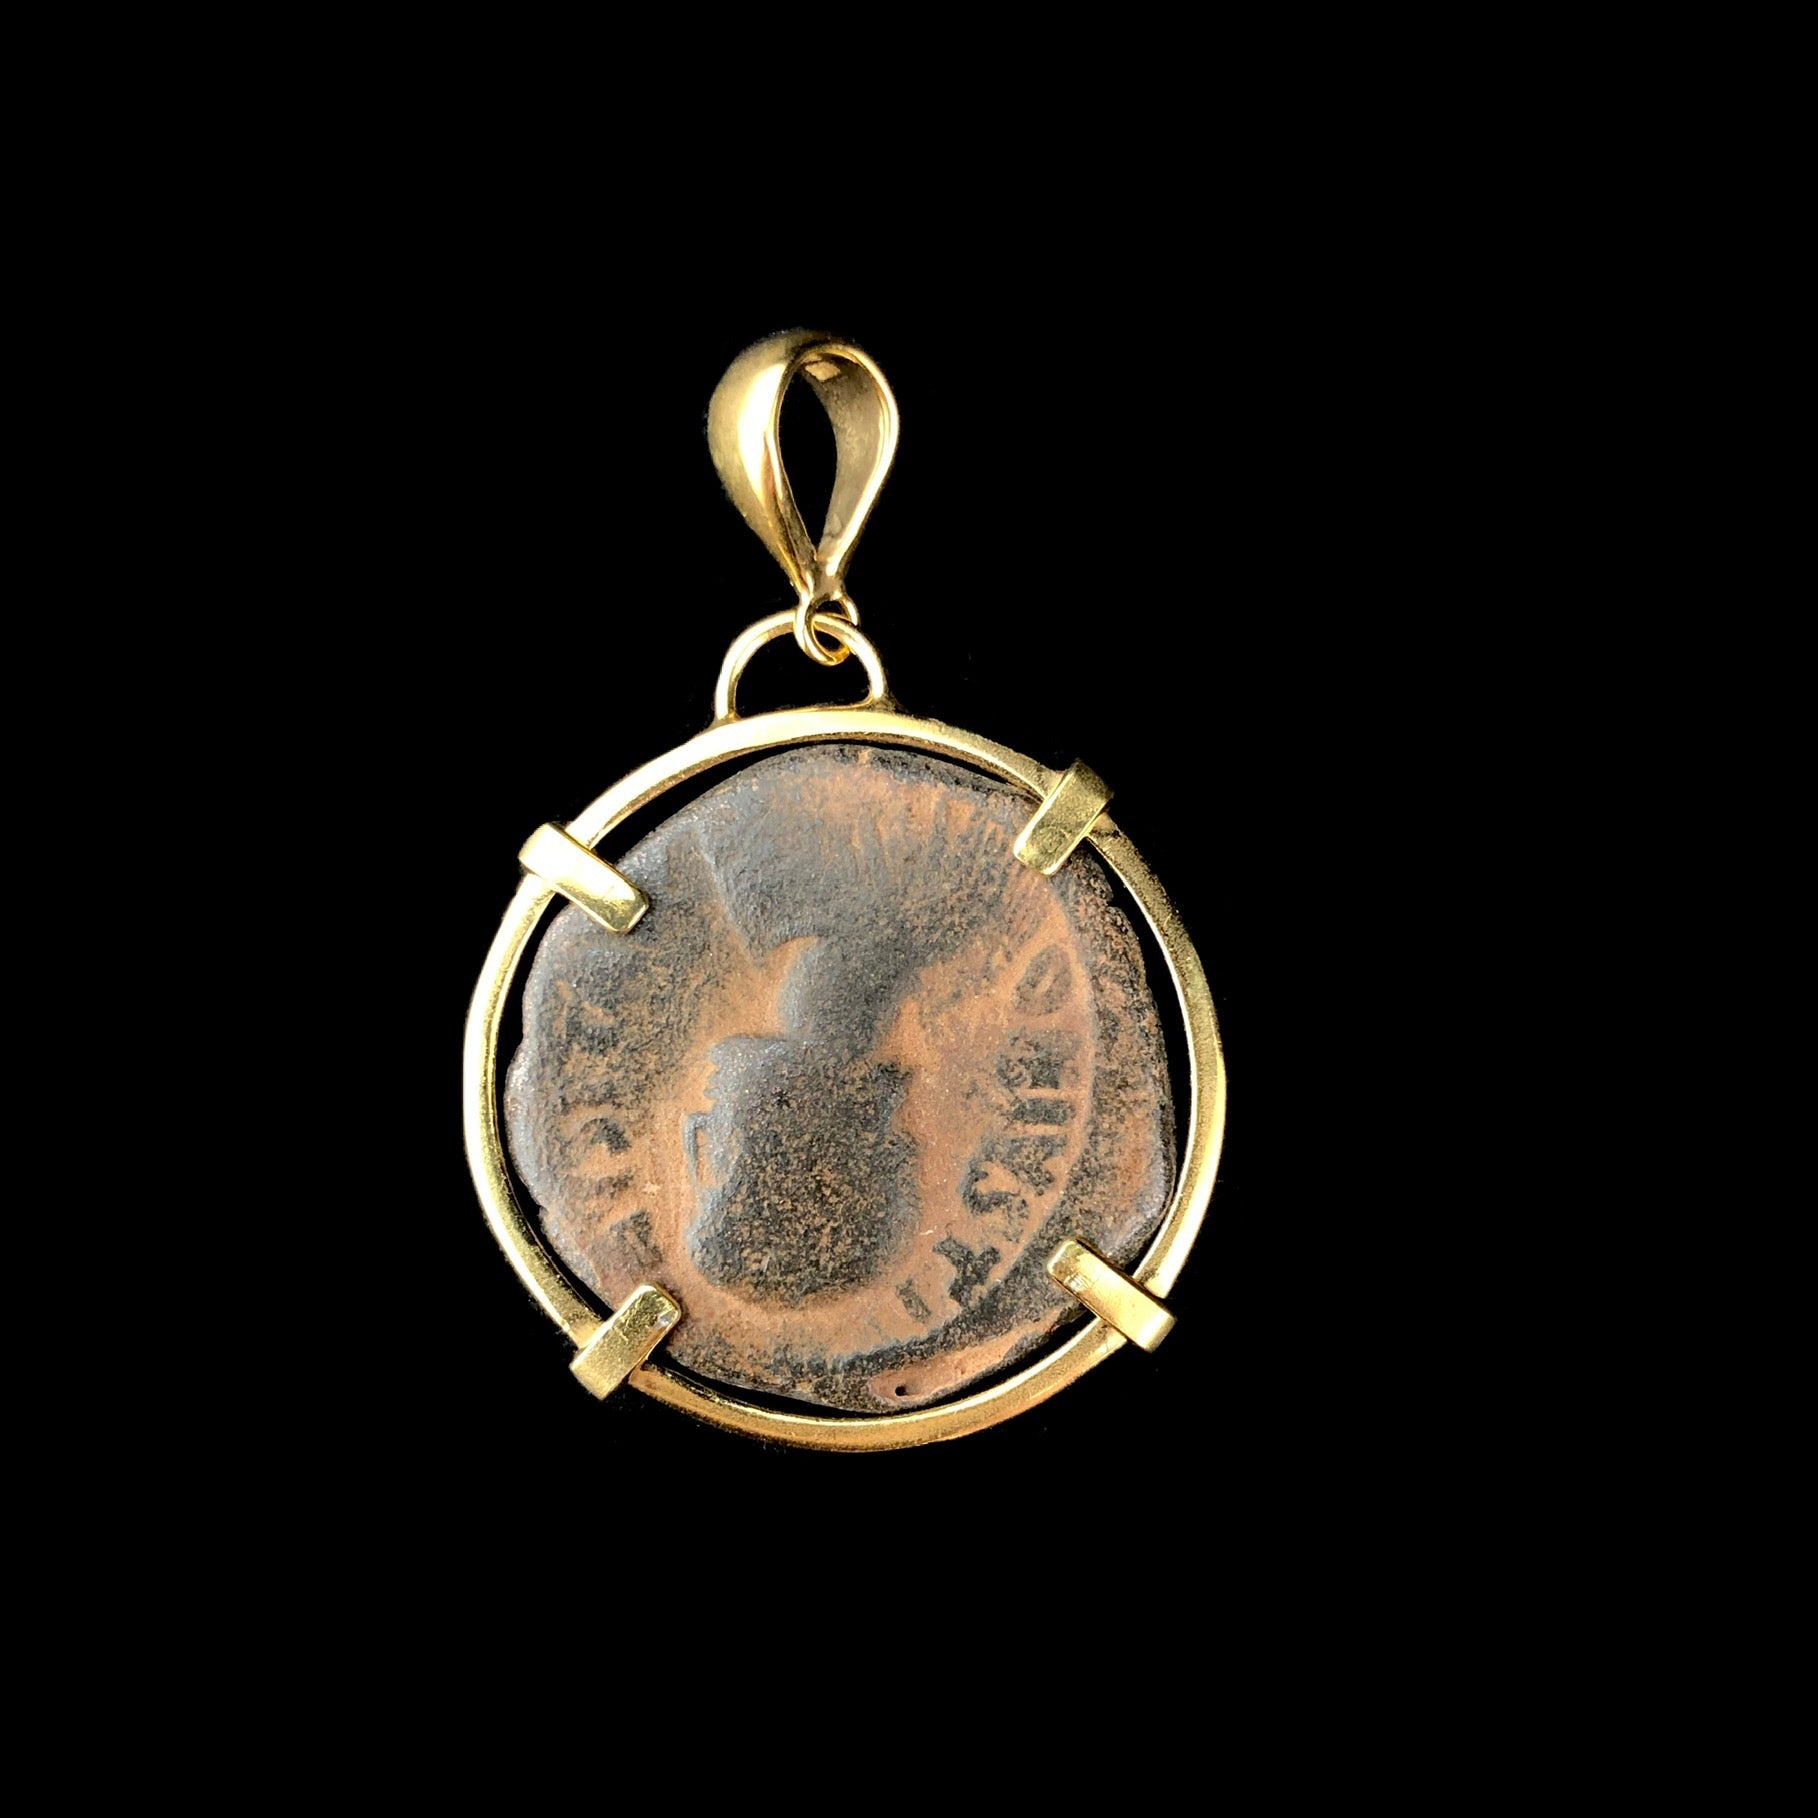 Back view of Byzantine Coin Pendent with a well worn human figure